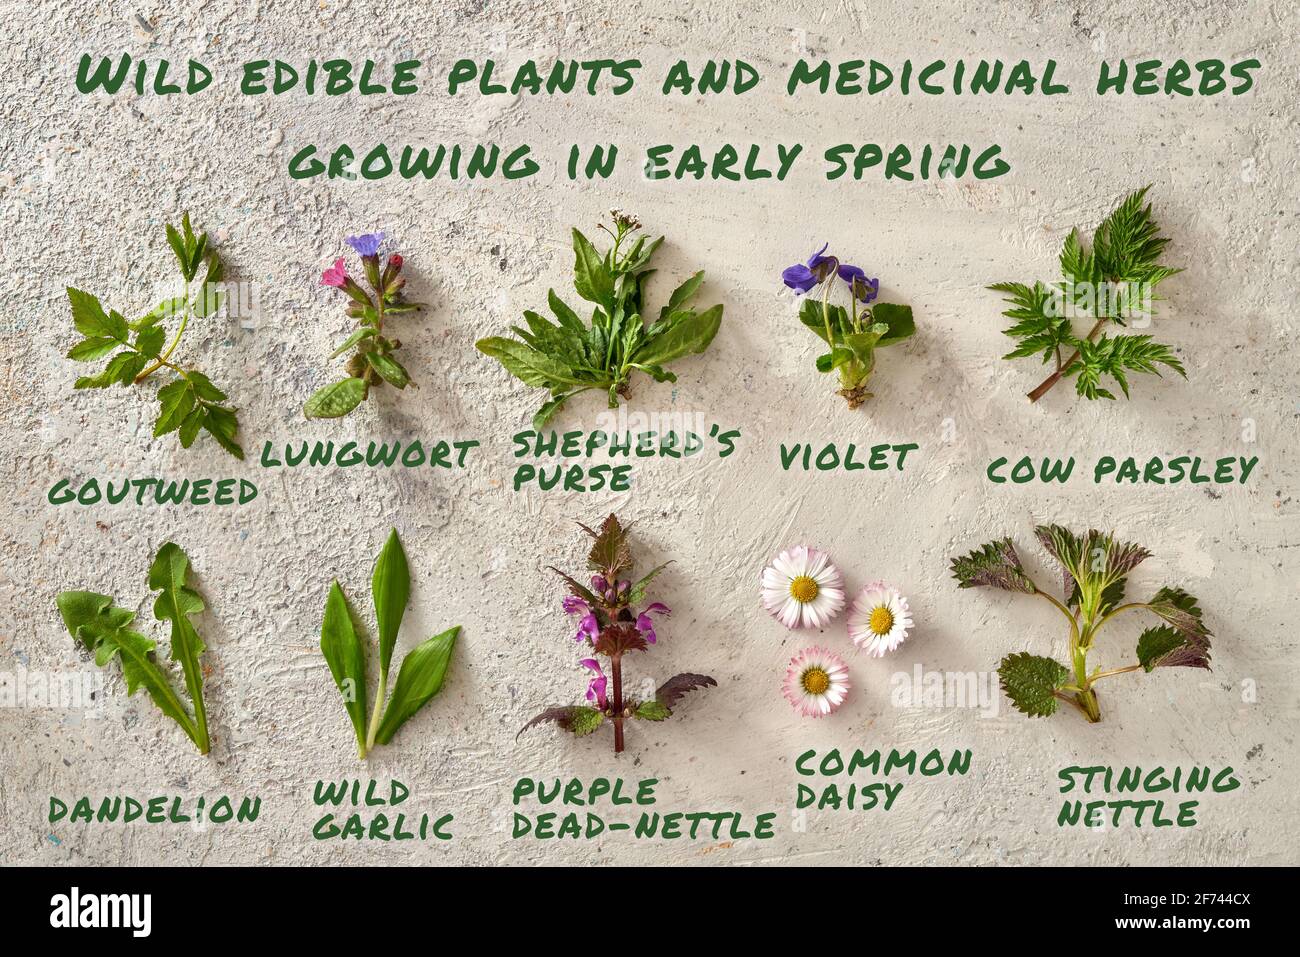 Dandelion, nettle, wild garlic, cow parsley and other wild edible plants and medicinal herbs growing in early spring, with inscriptions Stock Photo